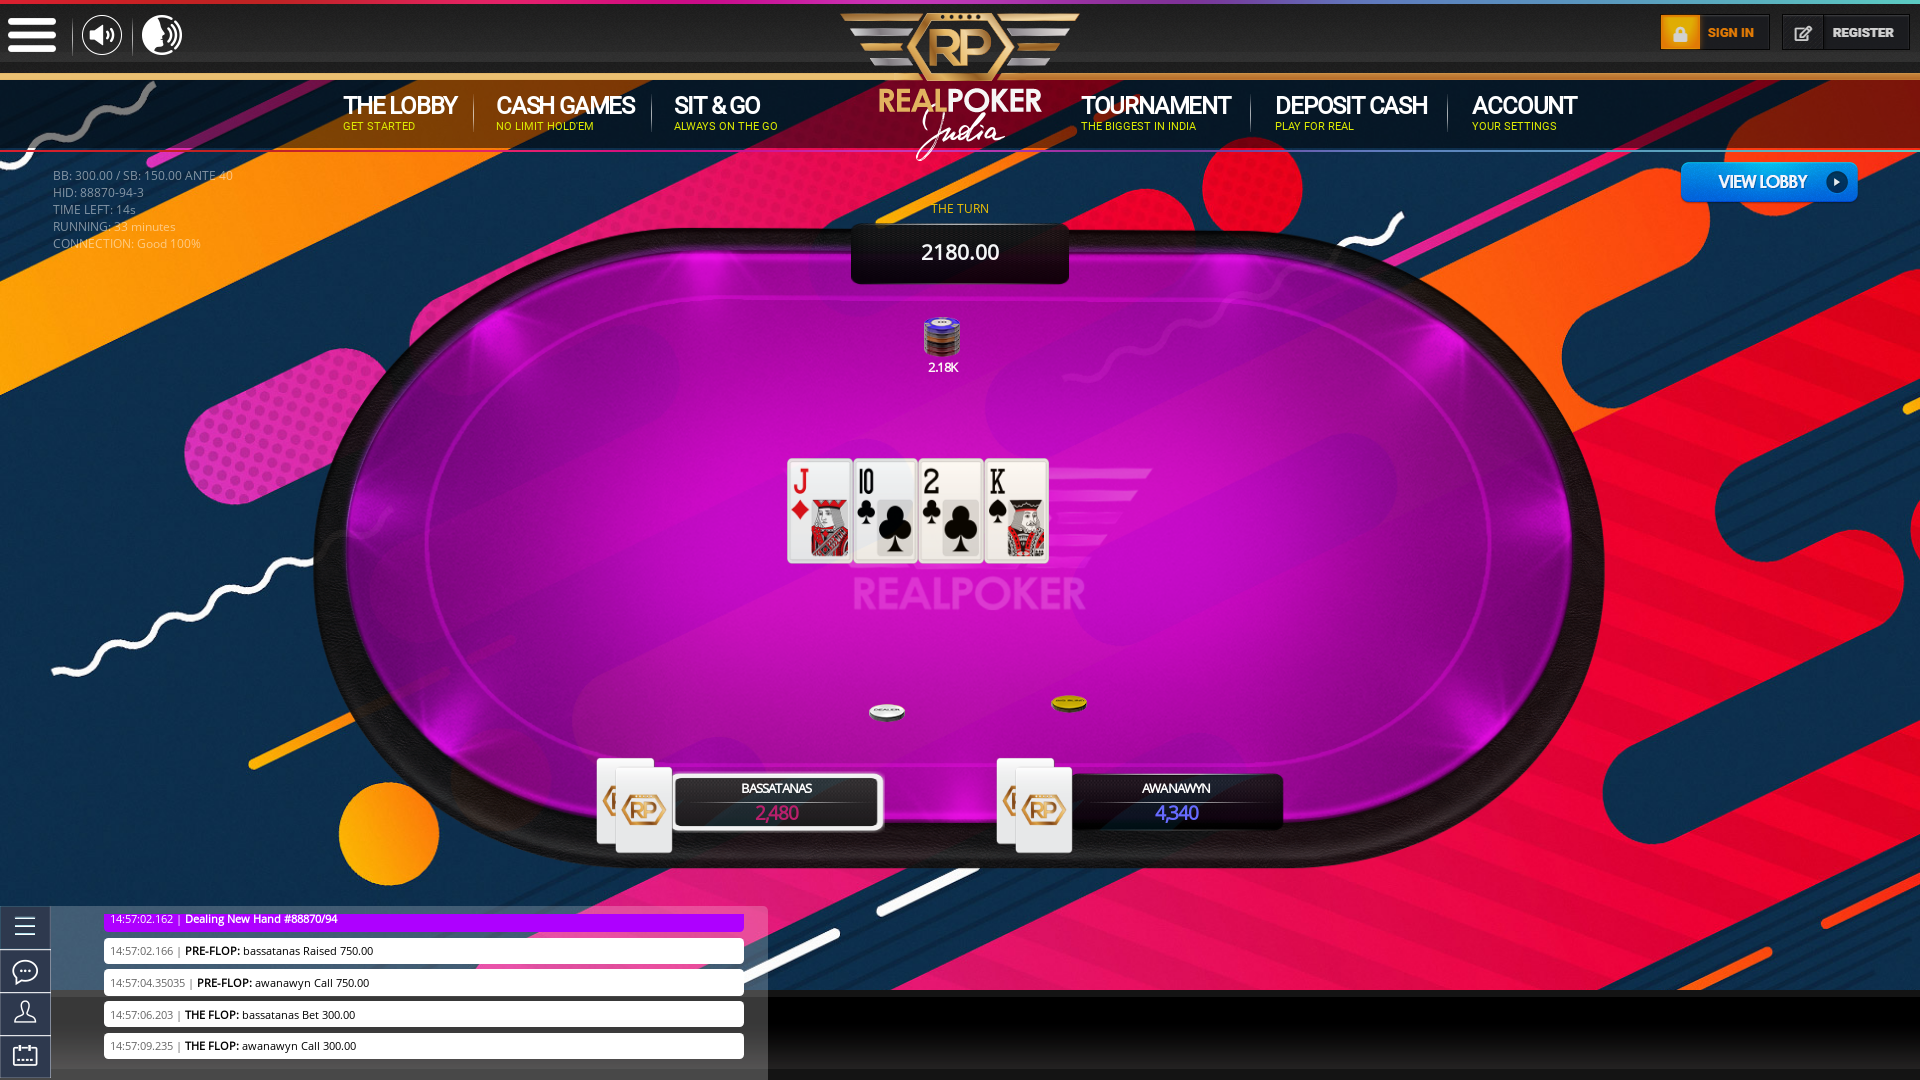 Indian poker on a 6 player table in the 33rd minute